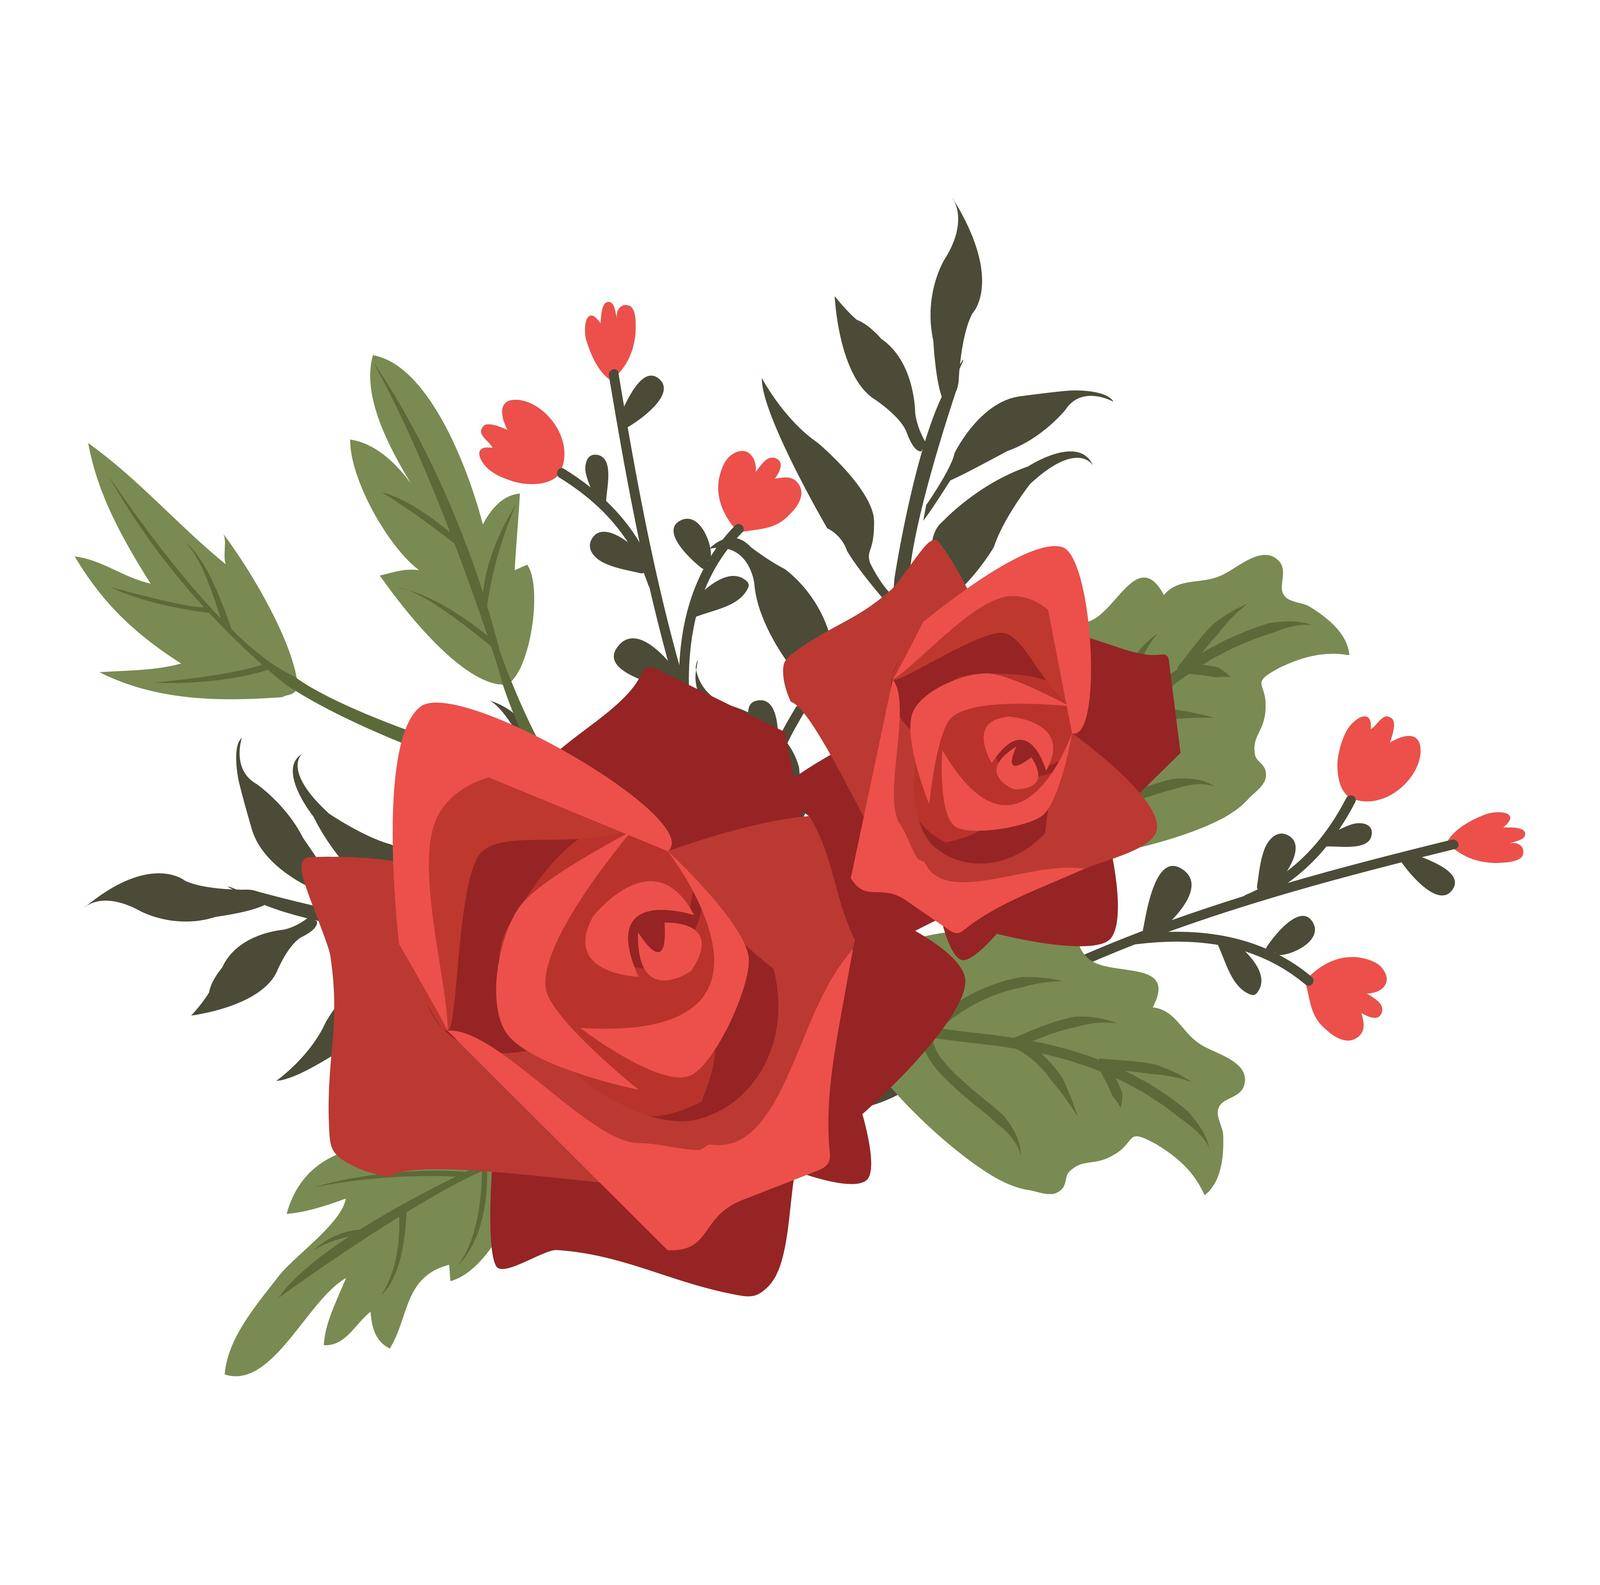 red rose flower bouquet decoration element by focus_bell